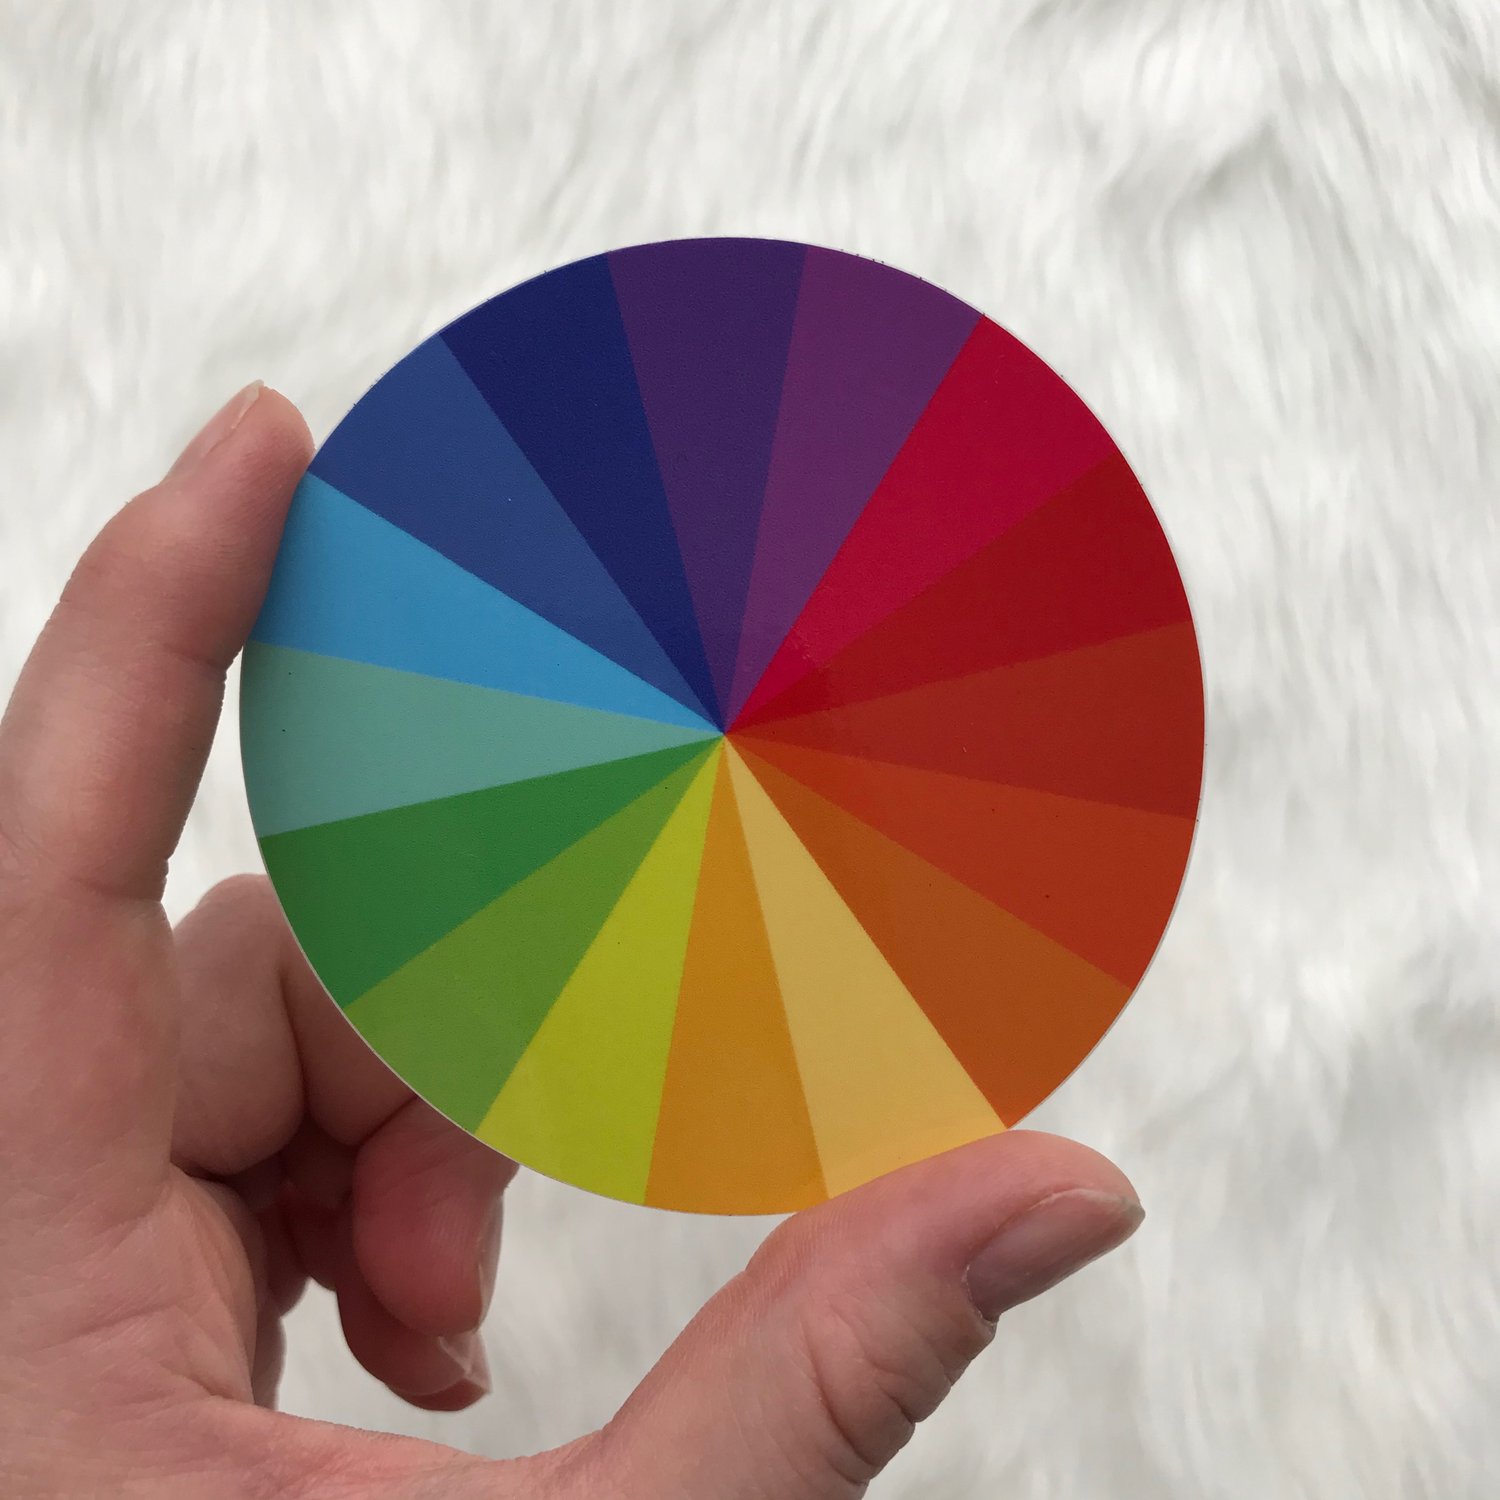 Image of Color Wheel Sticker - 3" inch